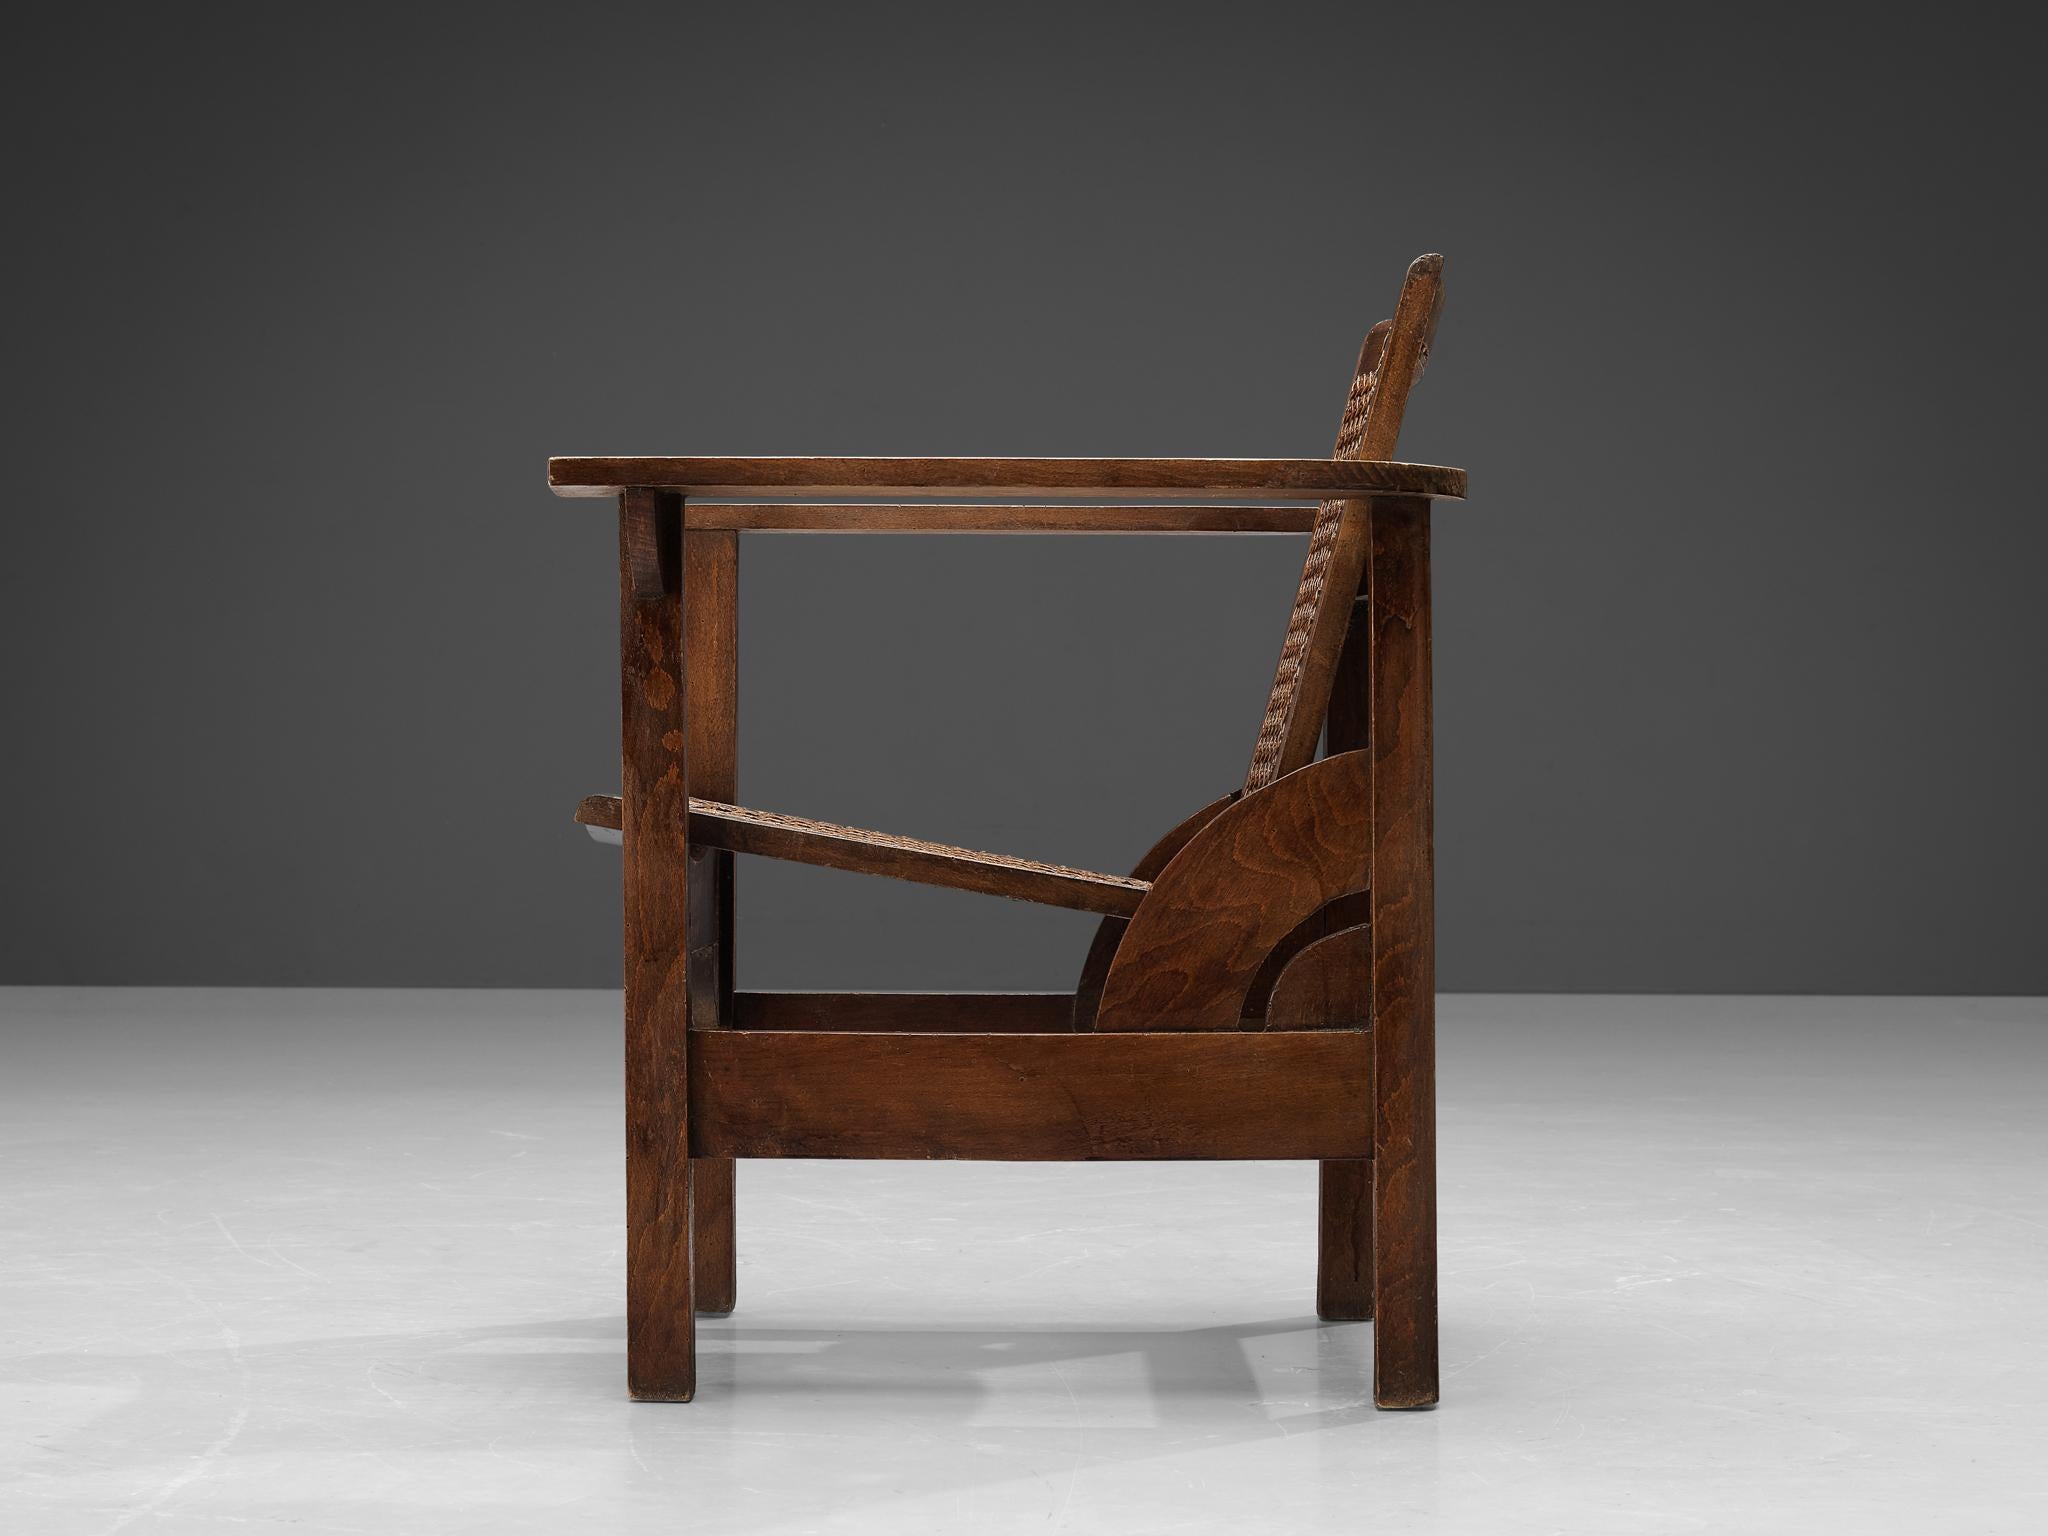 French Pierre Dariel 'Hendaye' Armchair in Dark Stained Wood and Cane